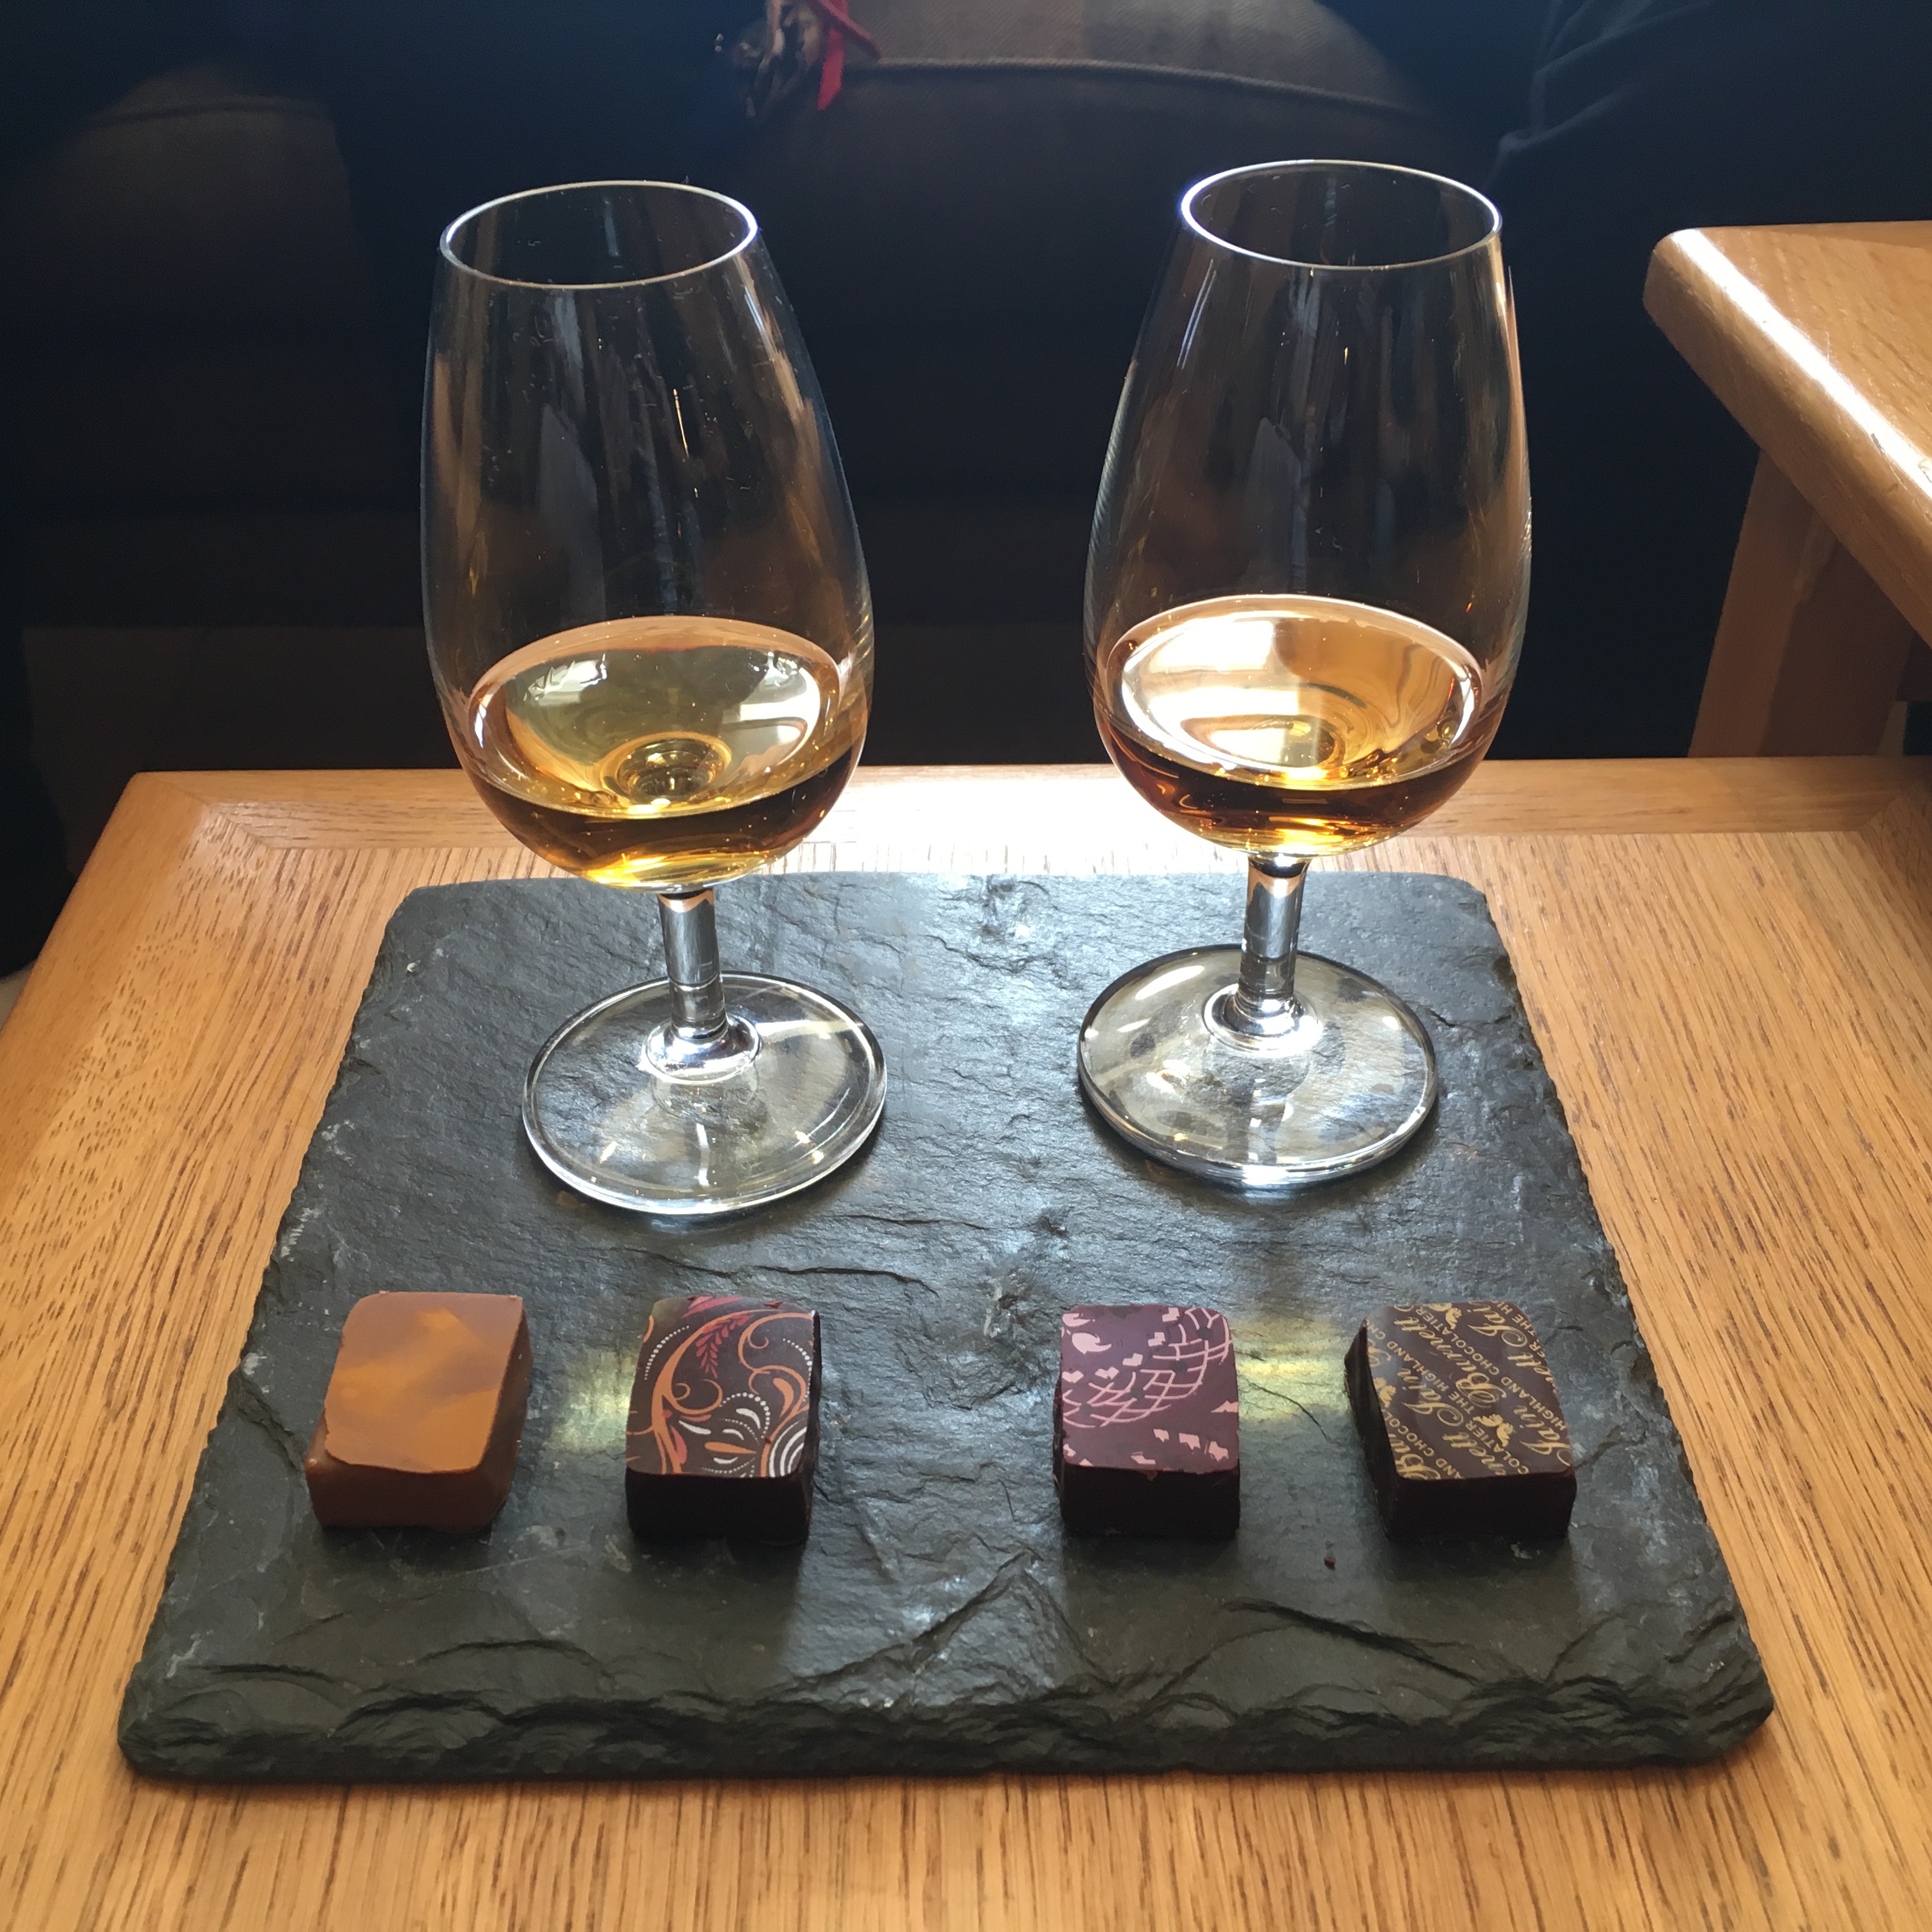 Glengoyne 18 and 21 paired with local artisanal chocolates.